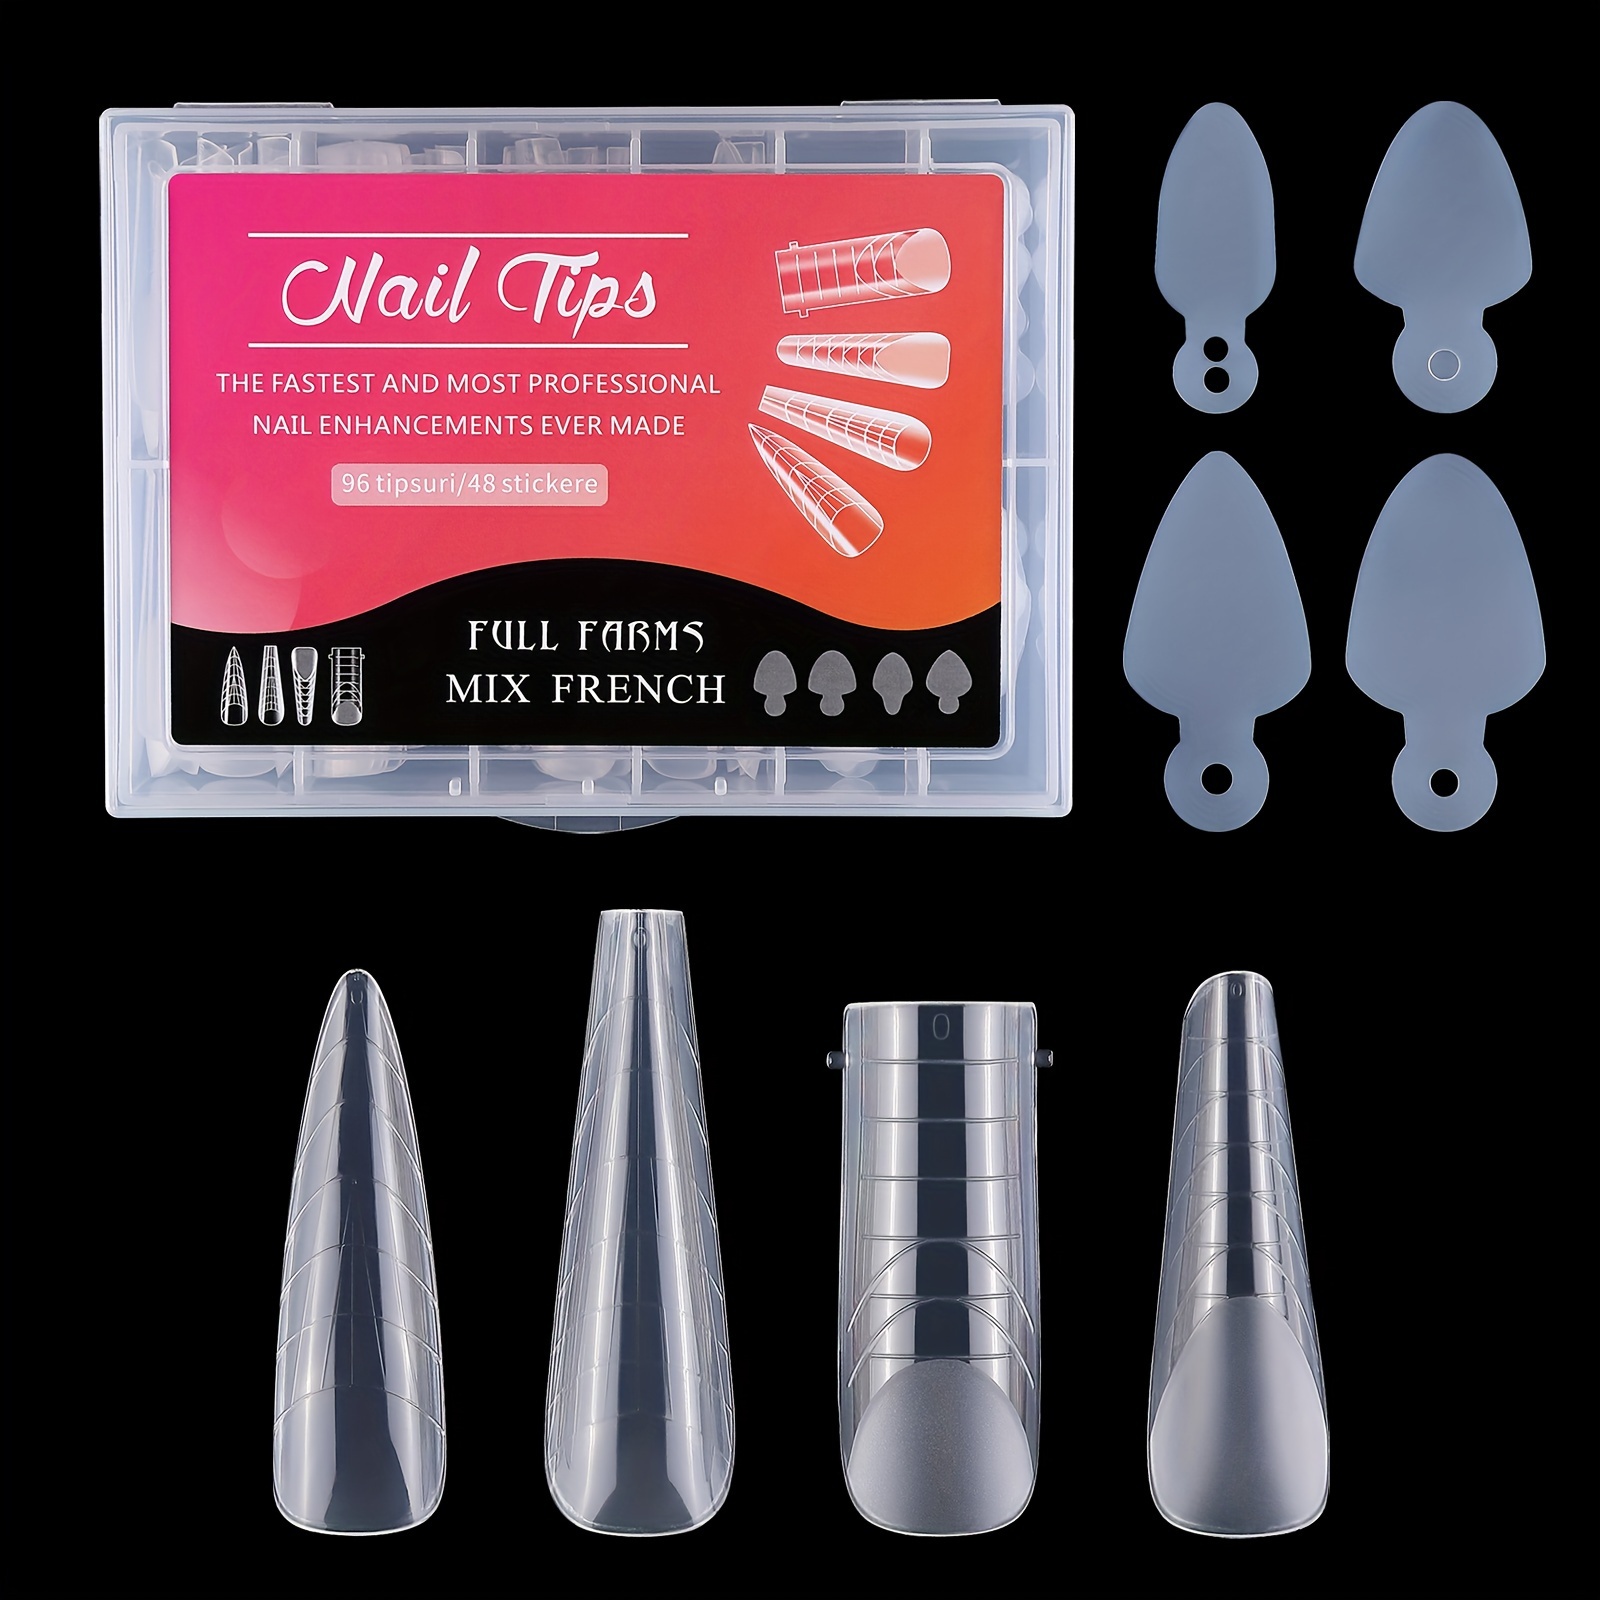 

Unique Simple Nail Tips Set With 4 Styles, Full Cover & French Fake Nails, Clear Acrylic Nail Forms With Extension Gel Kit For Diy Nail Art Salon Quality